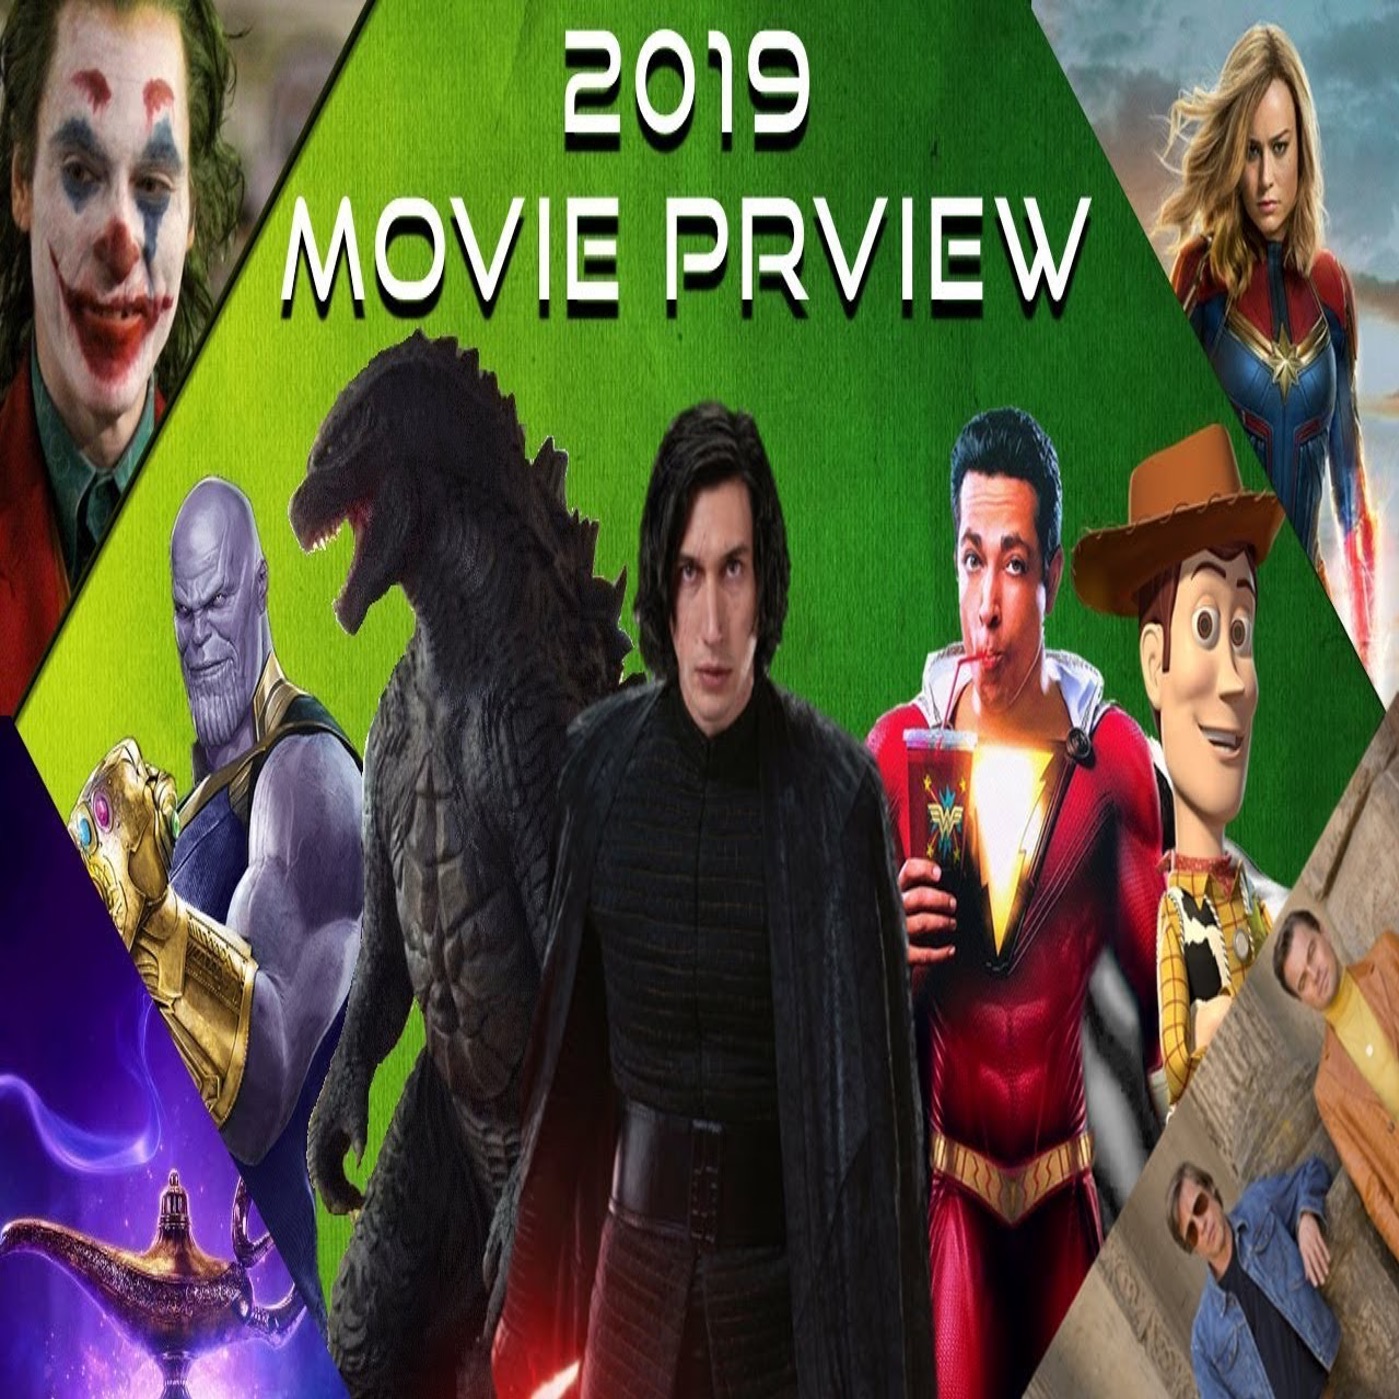 2019 Movie Preview/What's Our Most Anticipated Film?